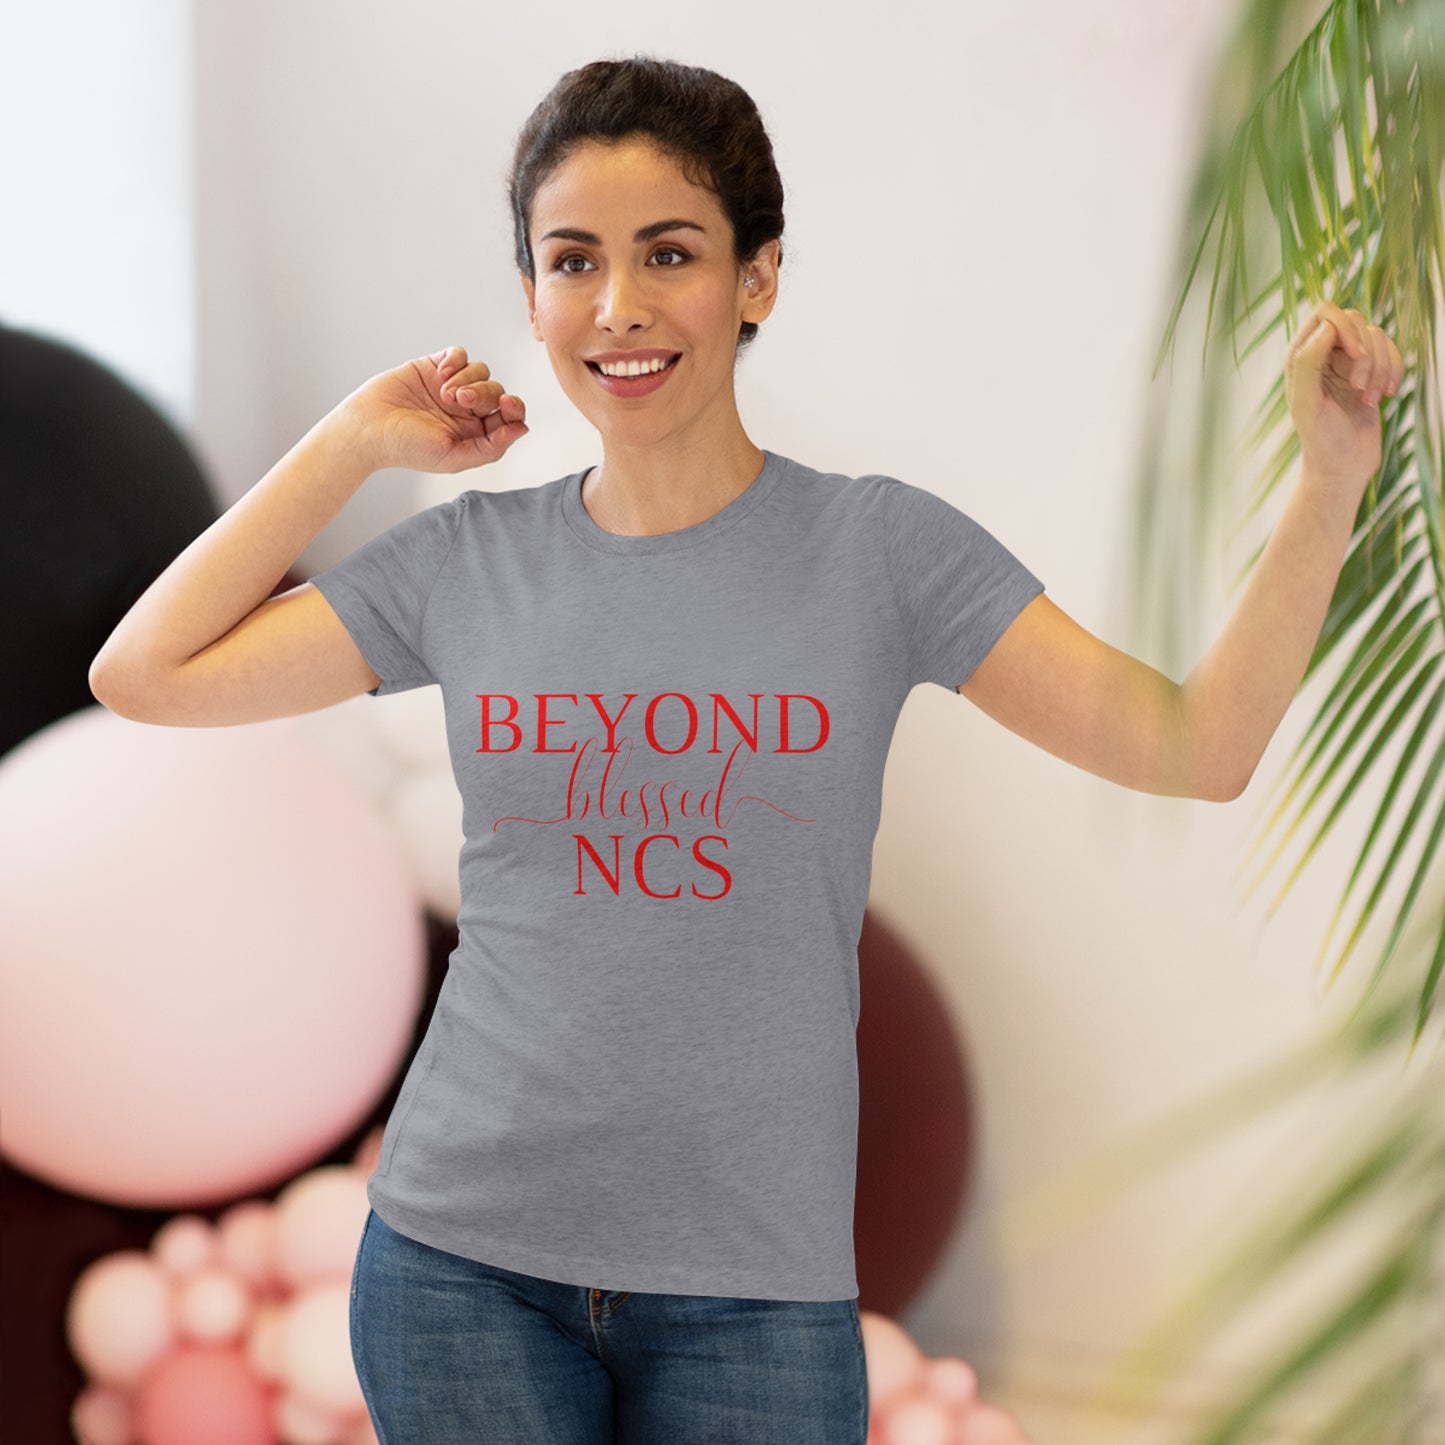 Beyond Blessed NCS - Women's Triblend Tee - Red